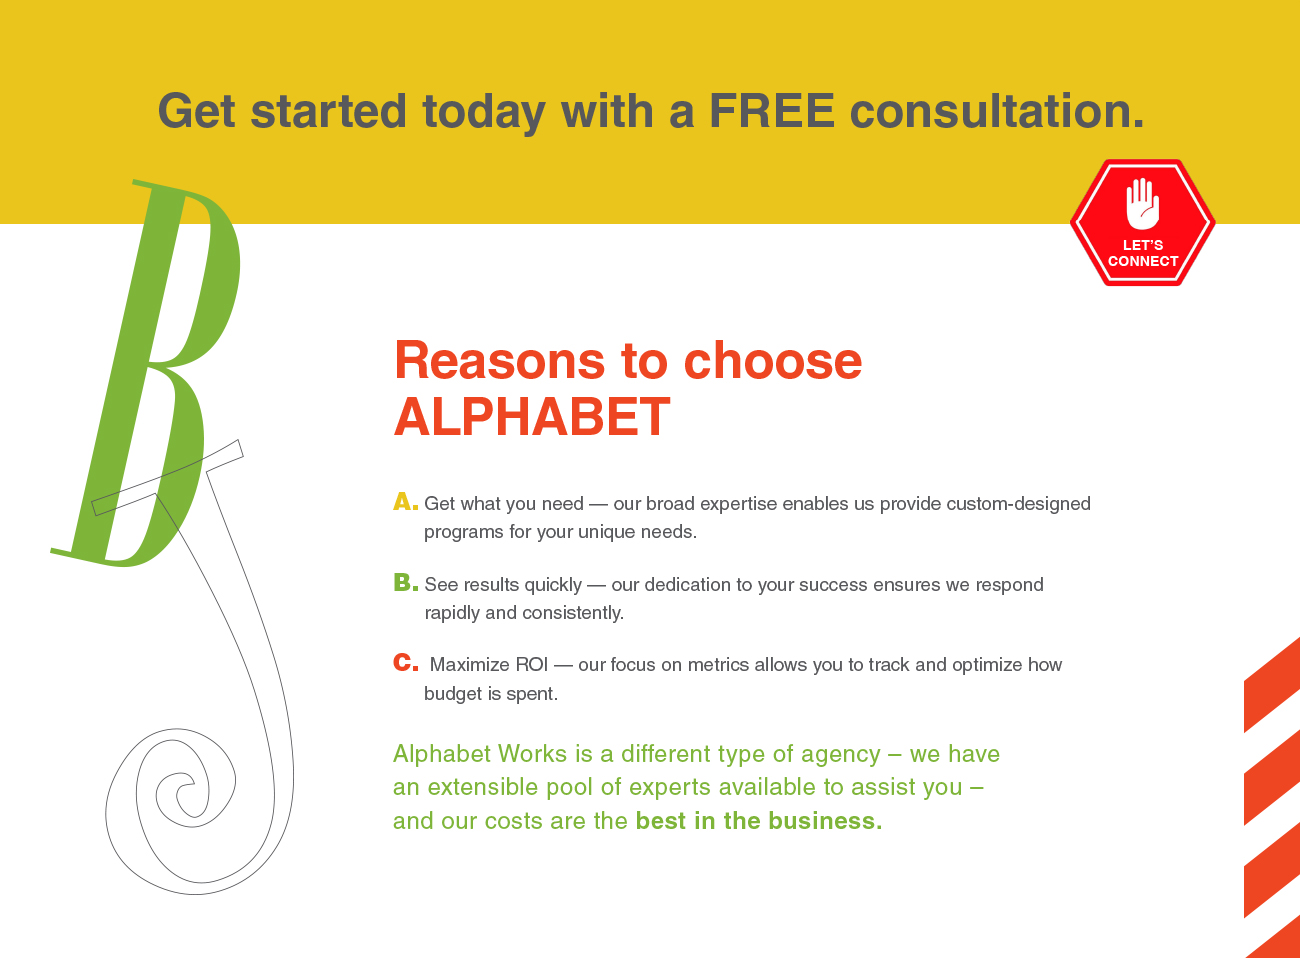 Get started today with a FREE consultation. Reasons to choose ALPHABET A. Get what you need — our broad expertise enables us provide custom-designed programs for your unique needs. B. See results quickly — our dedication to your success ensures we respond rapidly and consistently. C. Maximize ROI — our focus on metrics allows you to track and optimize how budget is spent. Alphabet Works is a different type of agency – we have
an extensible pool of experts available to assist you – and our costs are the best in the business.